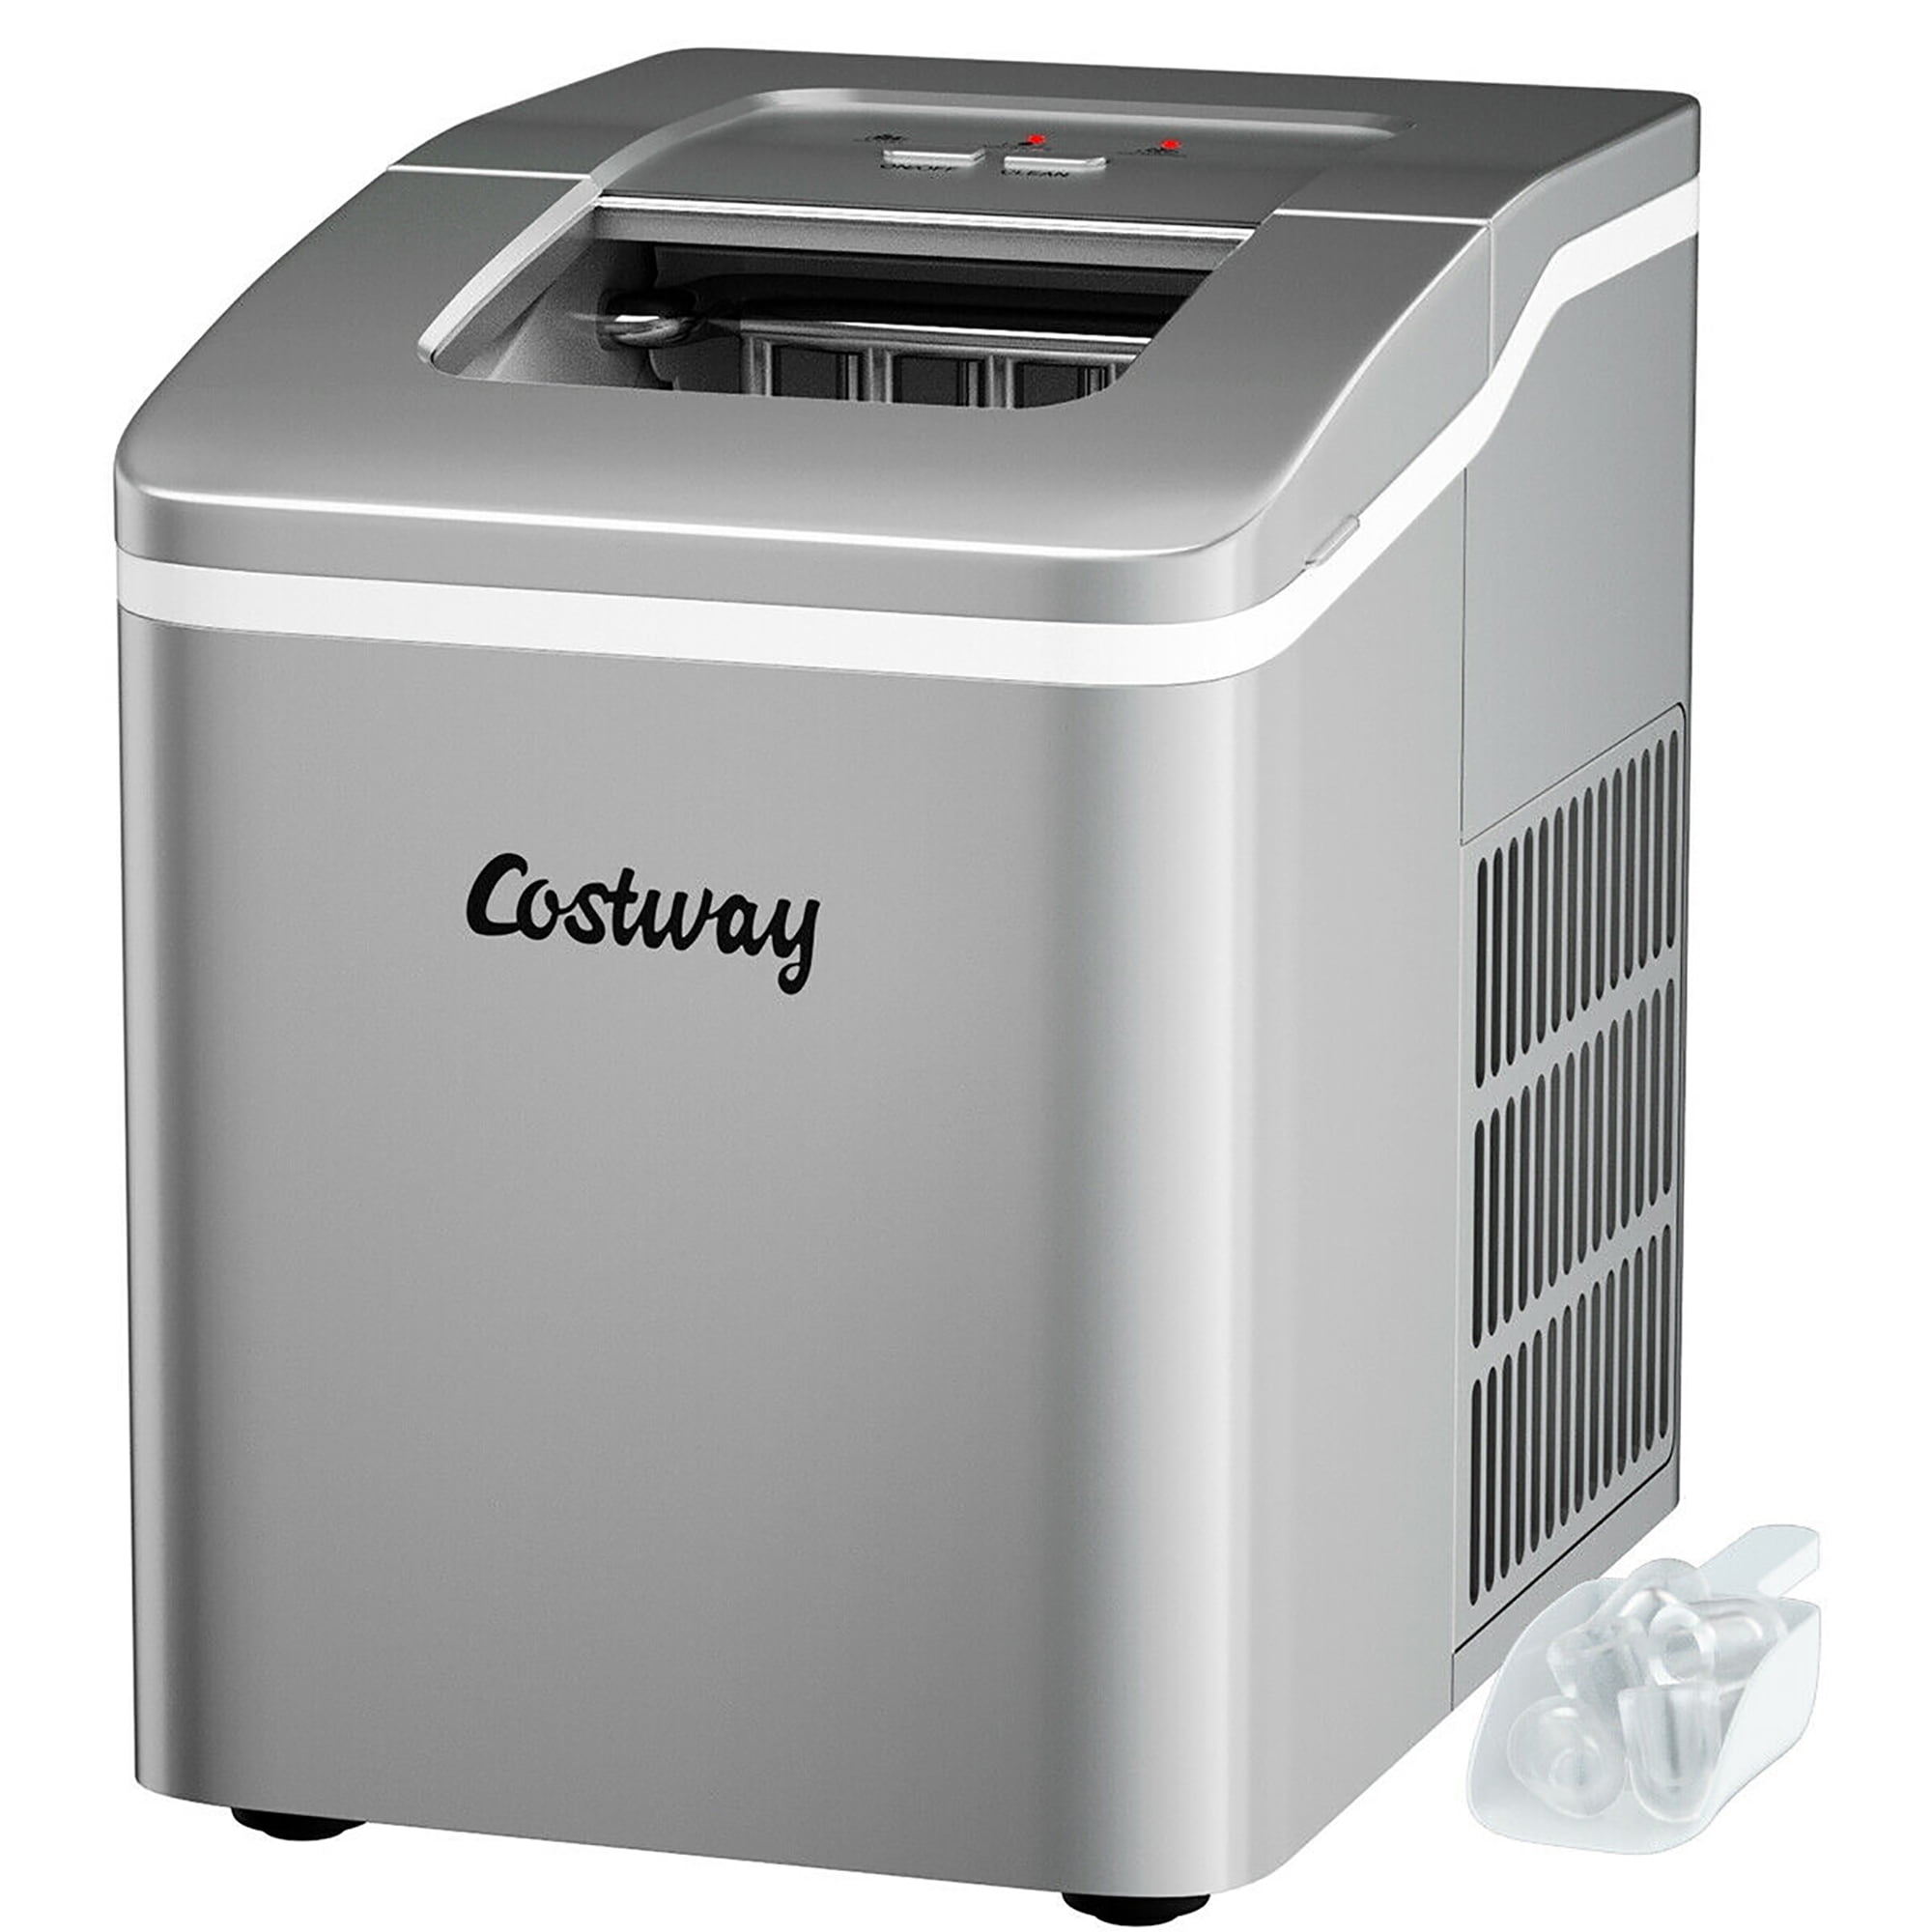 Portable Self-Clean Countertop Ice Maker with Ice Basket and Scoop - Costway